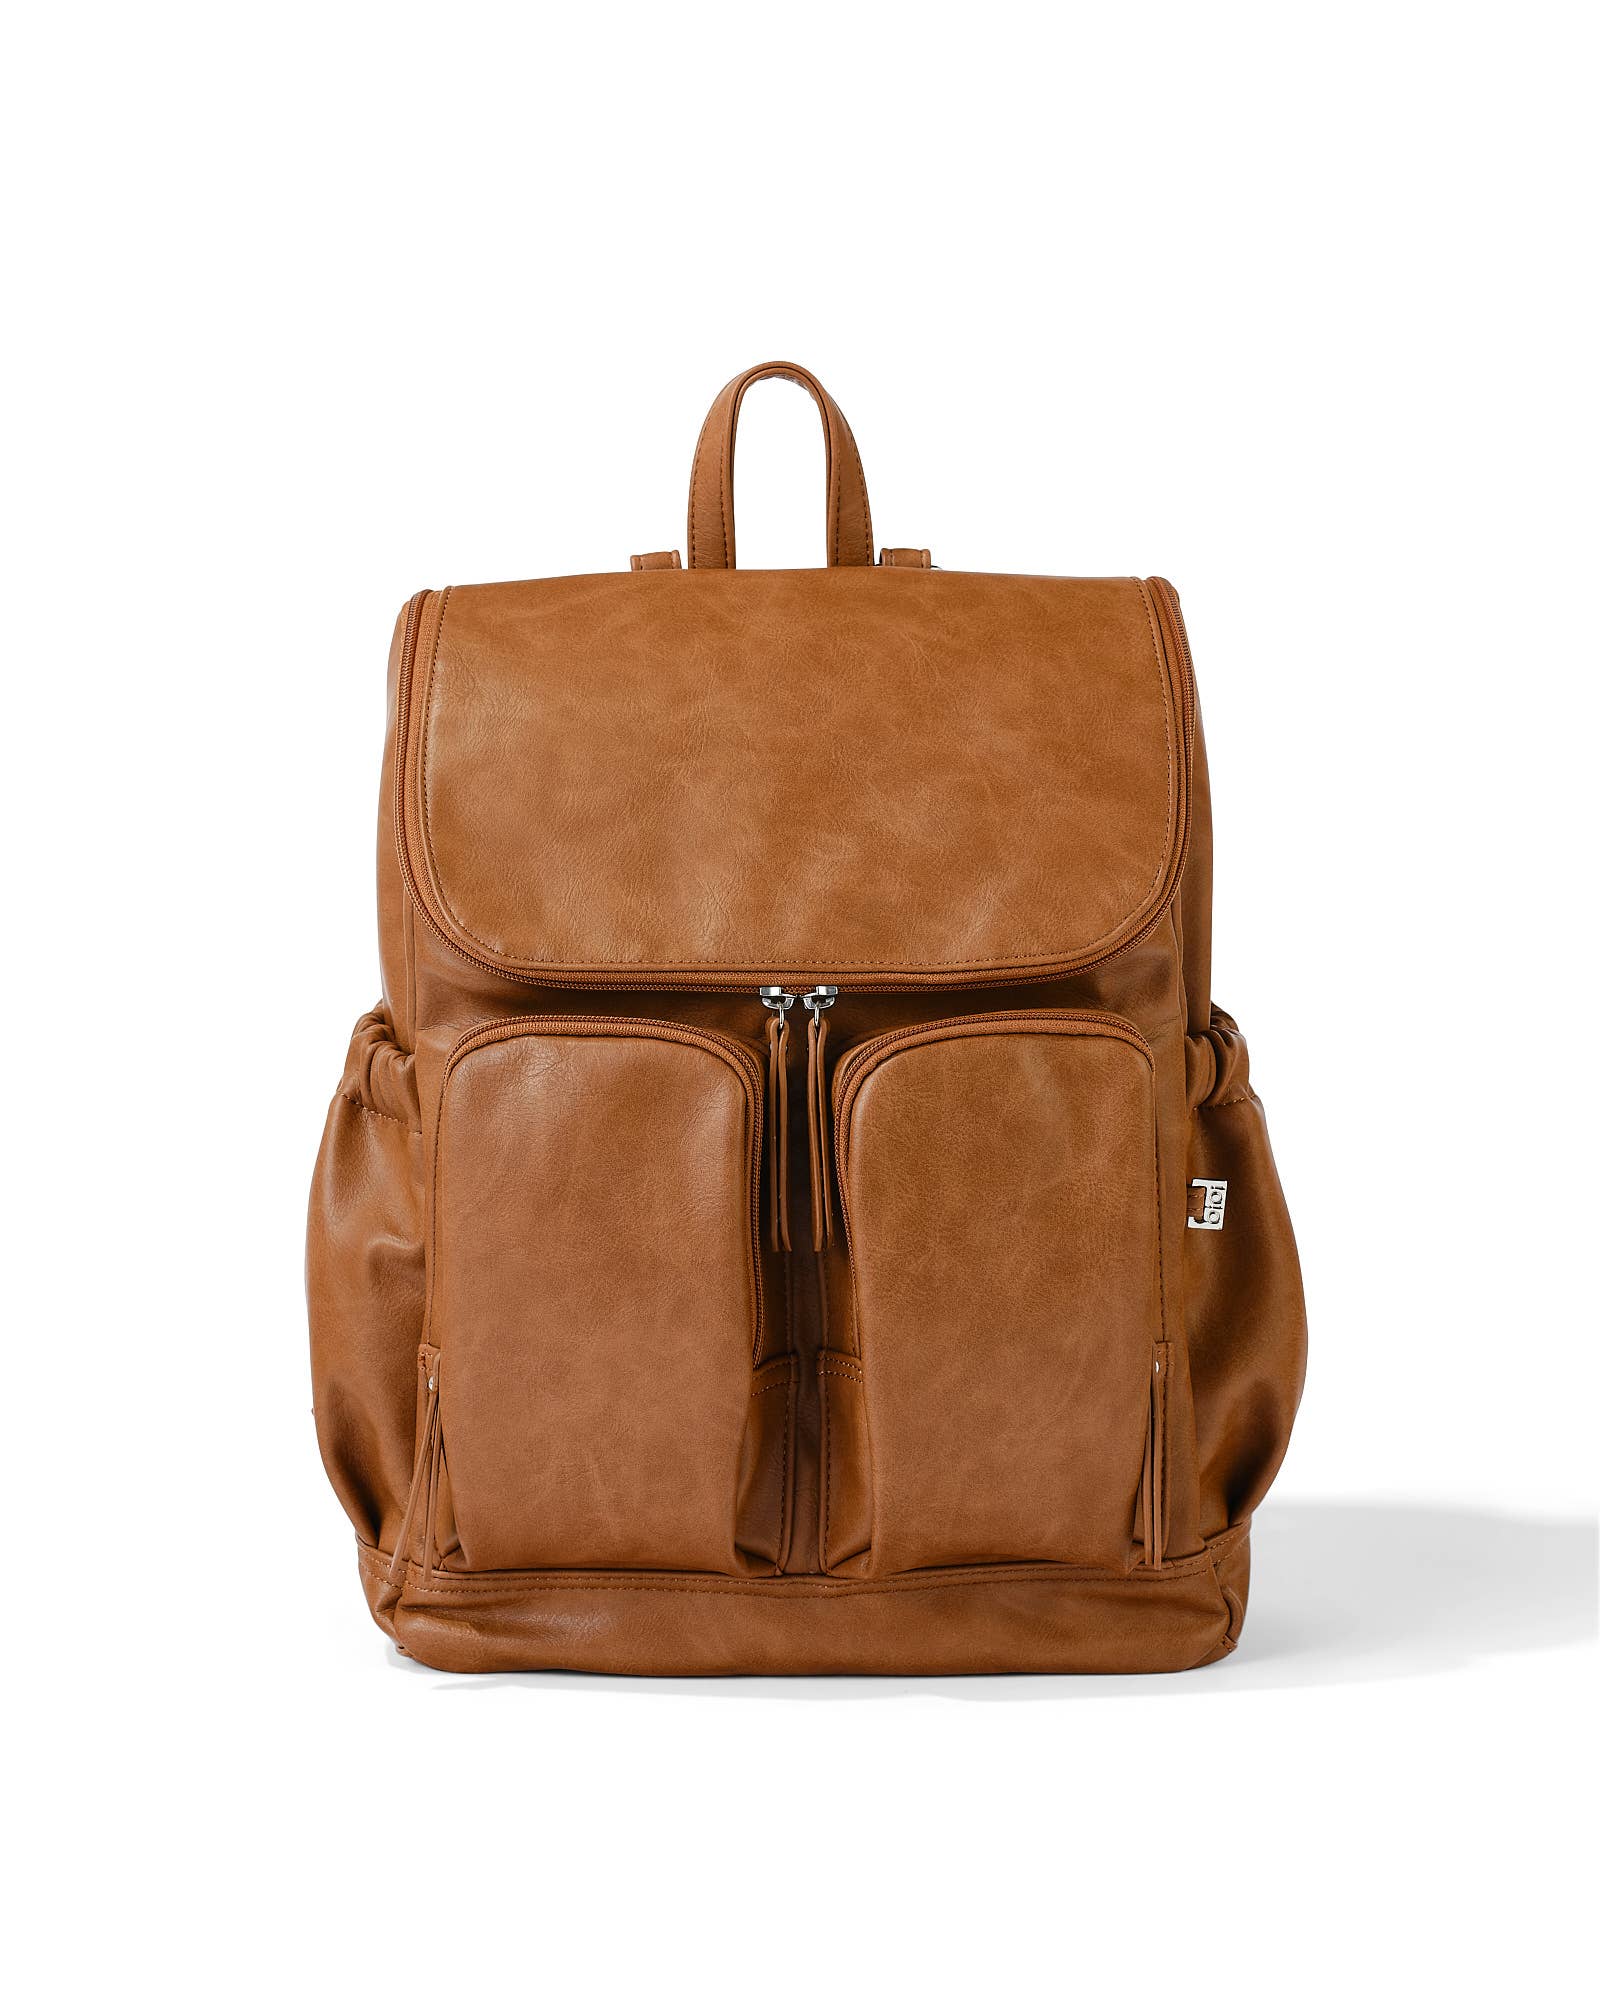 Signature Nappy Backpack - Tan Faux Leather-bag-Oi Oi-PRE ORDER END OF AUGUST-Little Soldiers